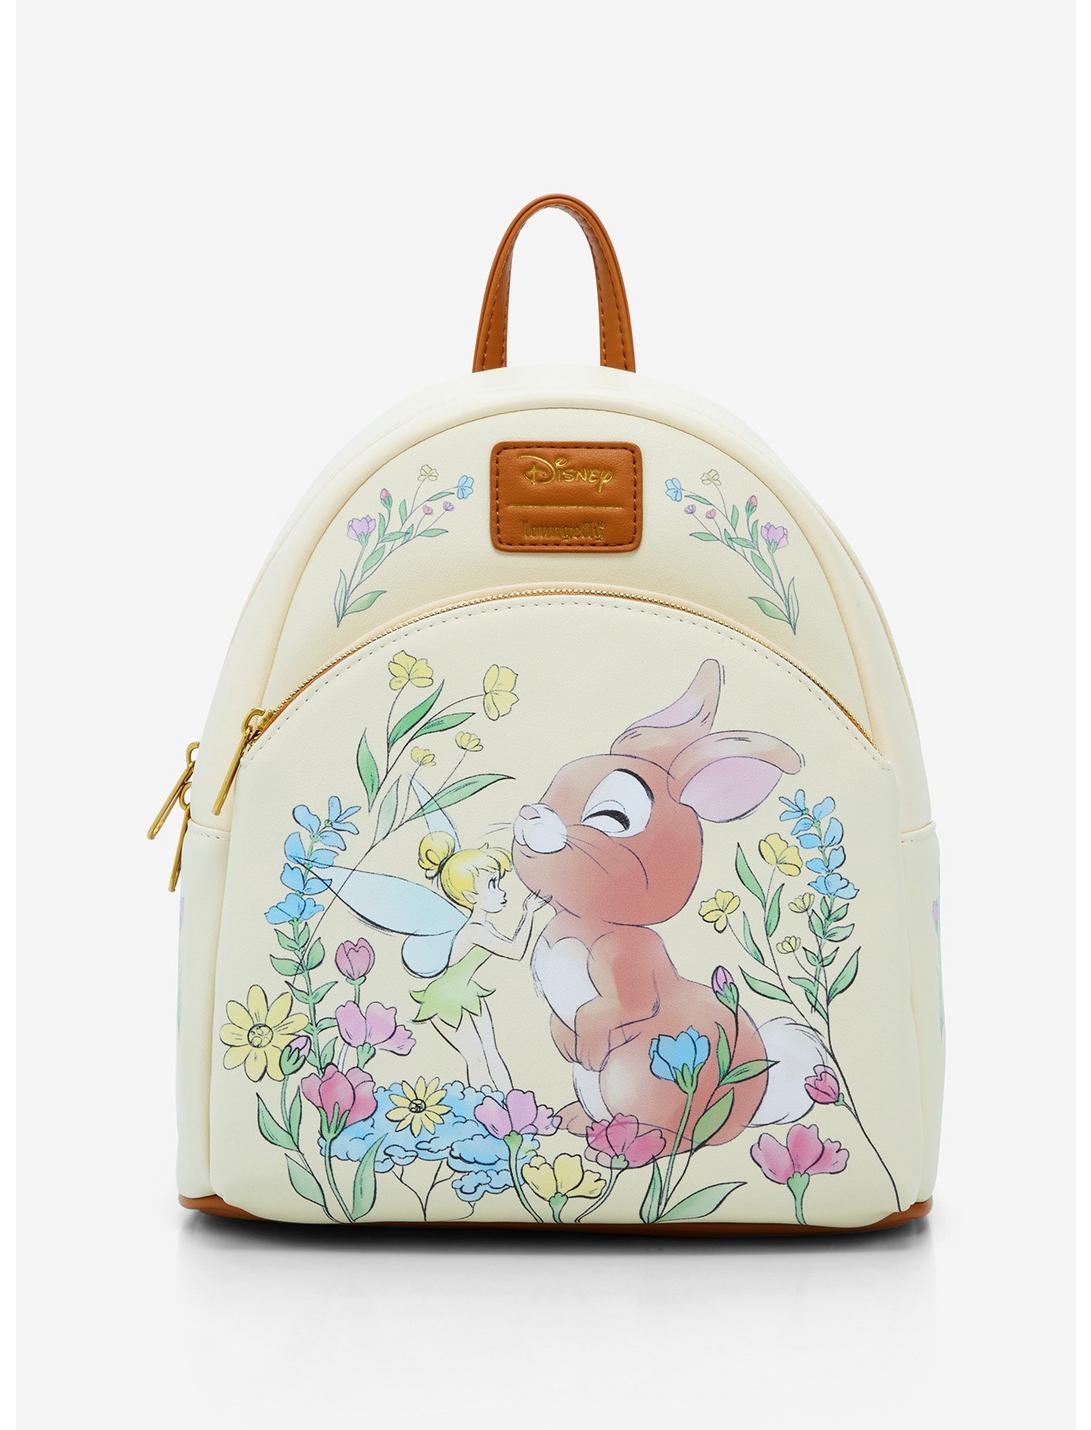 Loungefly Disney Tinker Bell & Bunny Mini Backpack, , hi-res